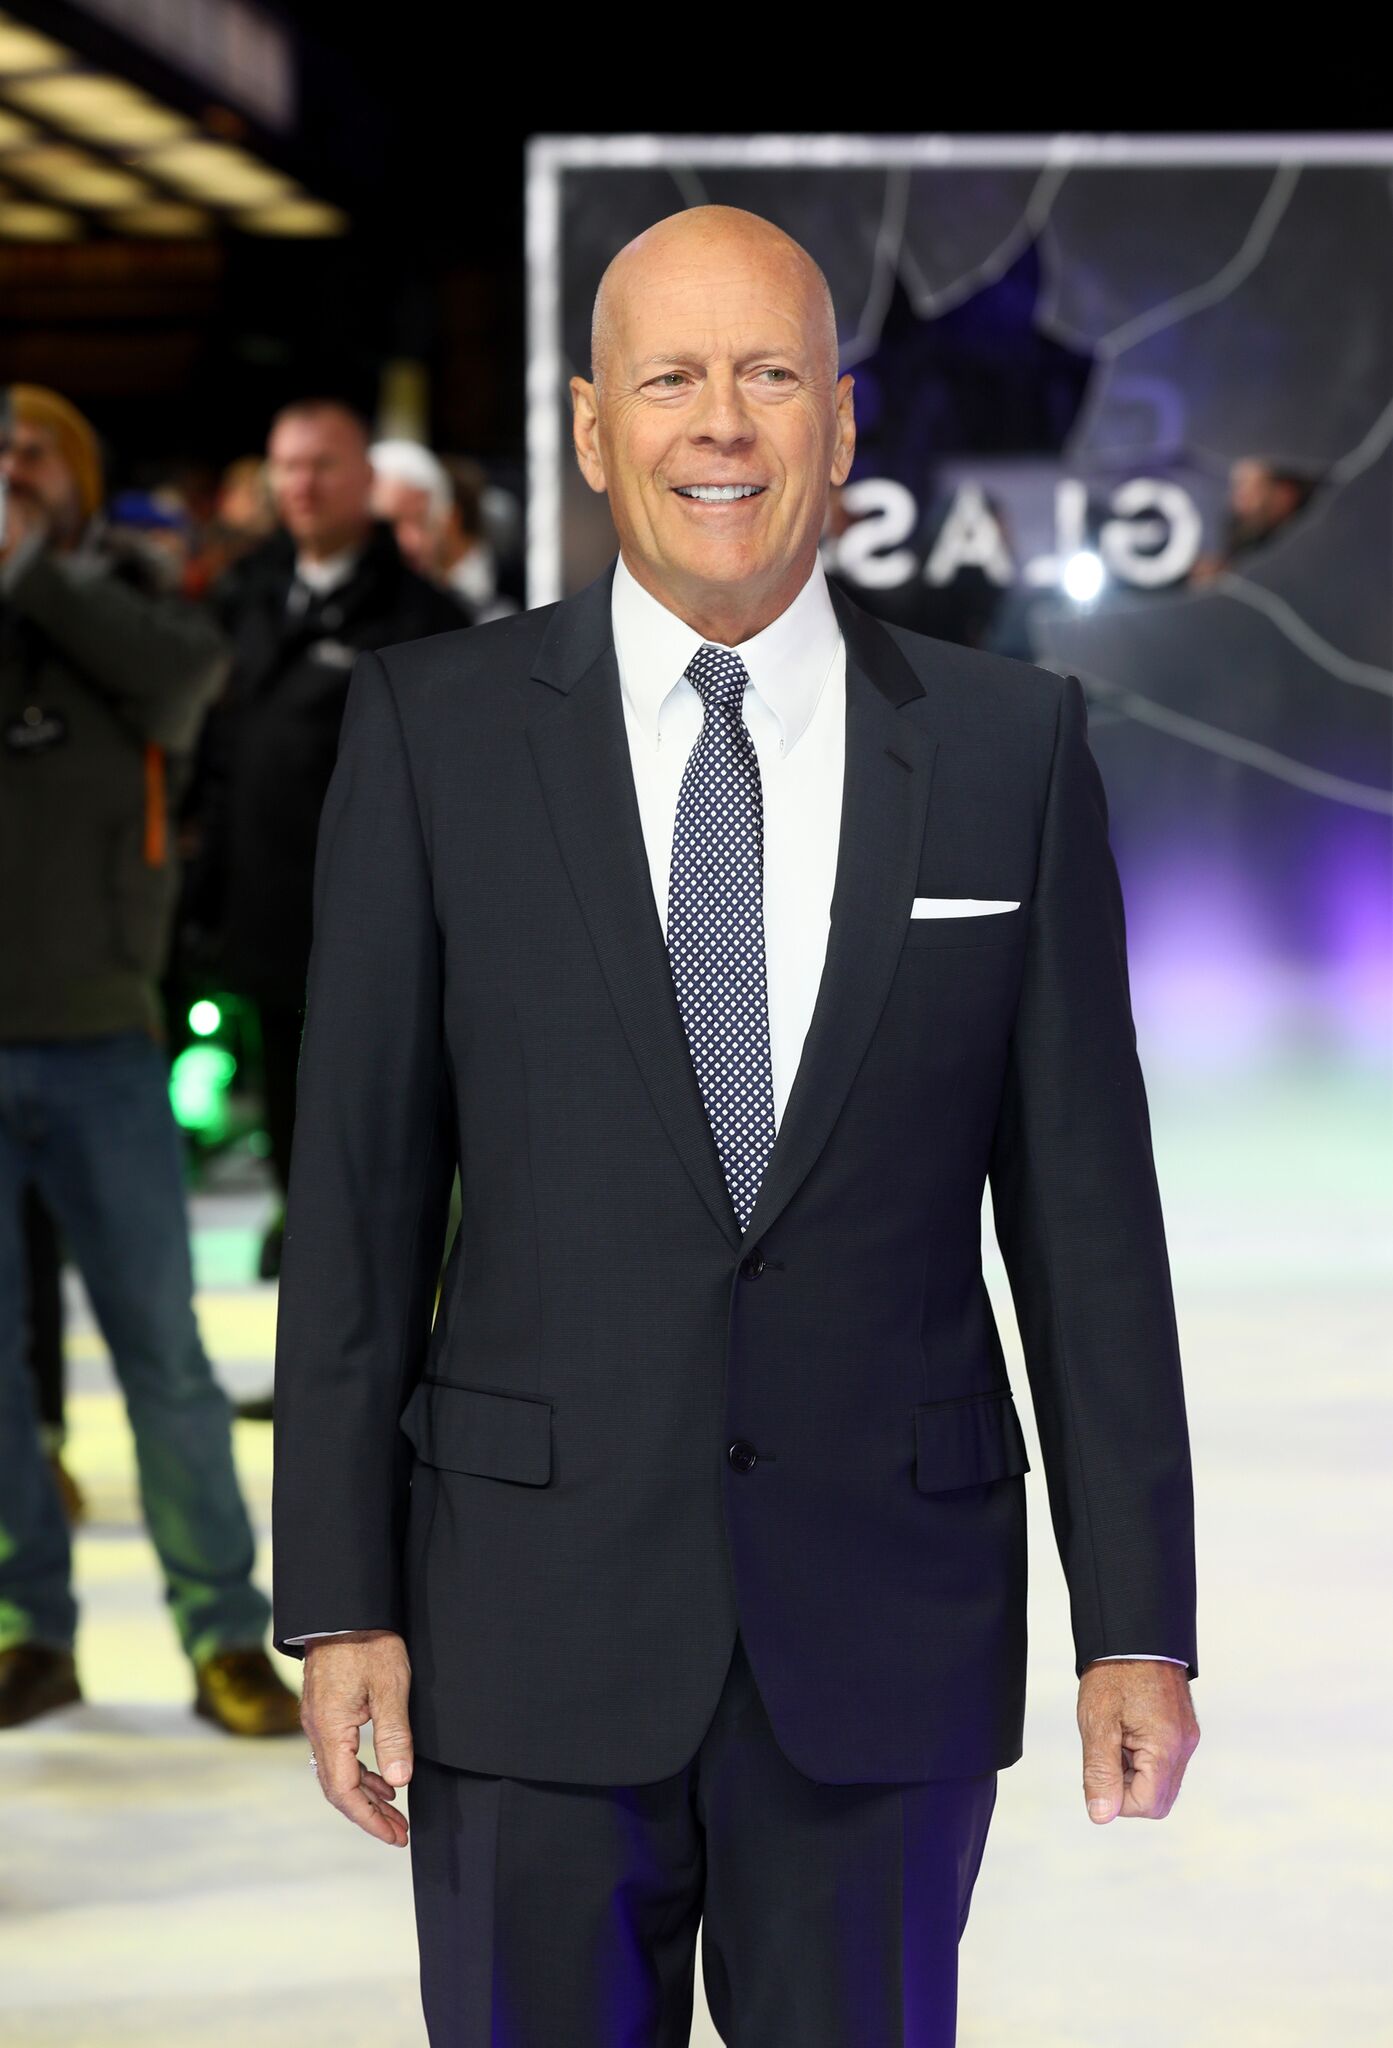 Bruce Willis attends the UK Premiere of M. Night Shyamalan's all-new comic-book thriller "Glass" at Curzon Cinema Mayfair on January 9, 2019 in London, England. | Photo: Getty Images | Photo: Getty Images